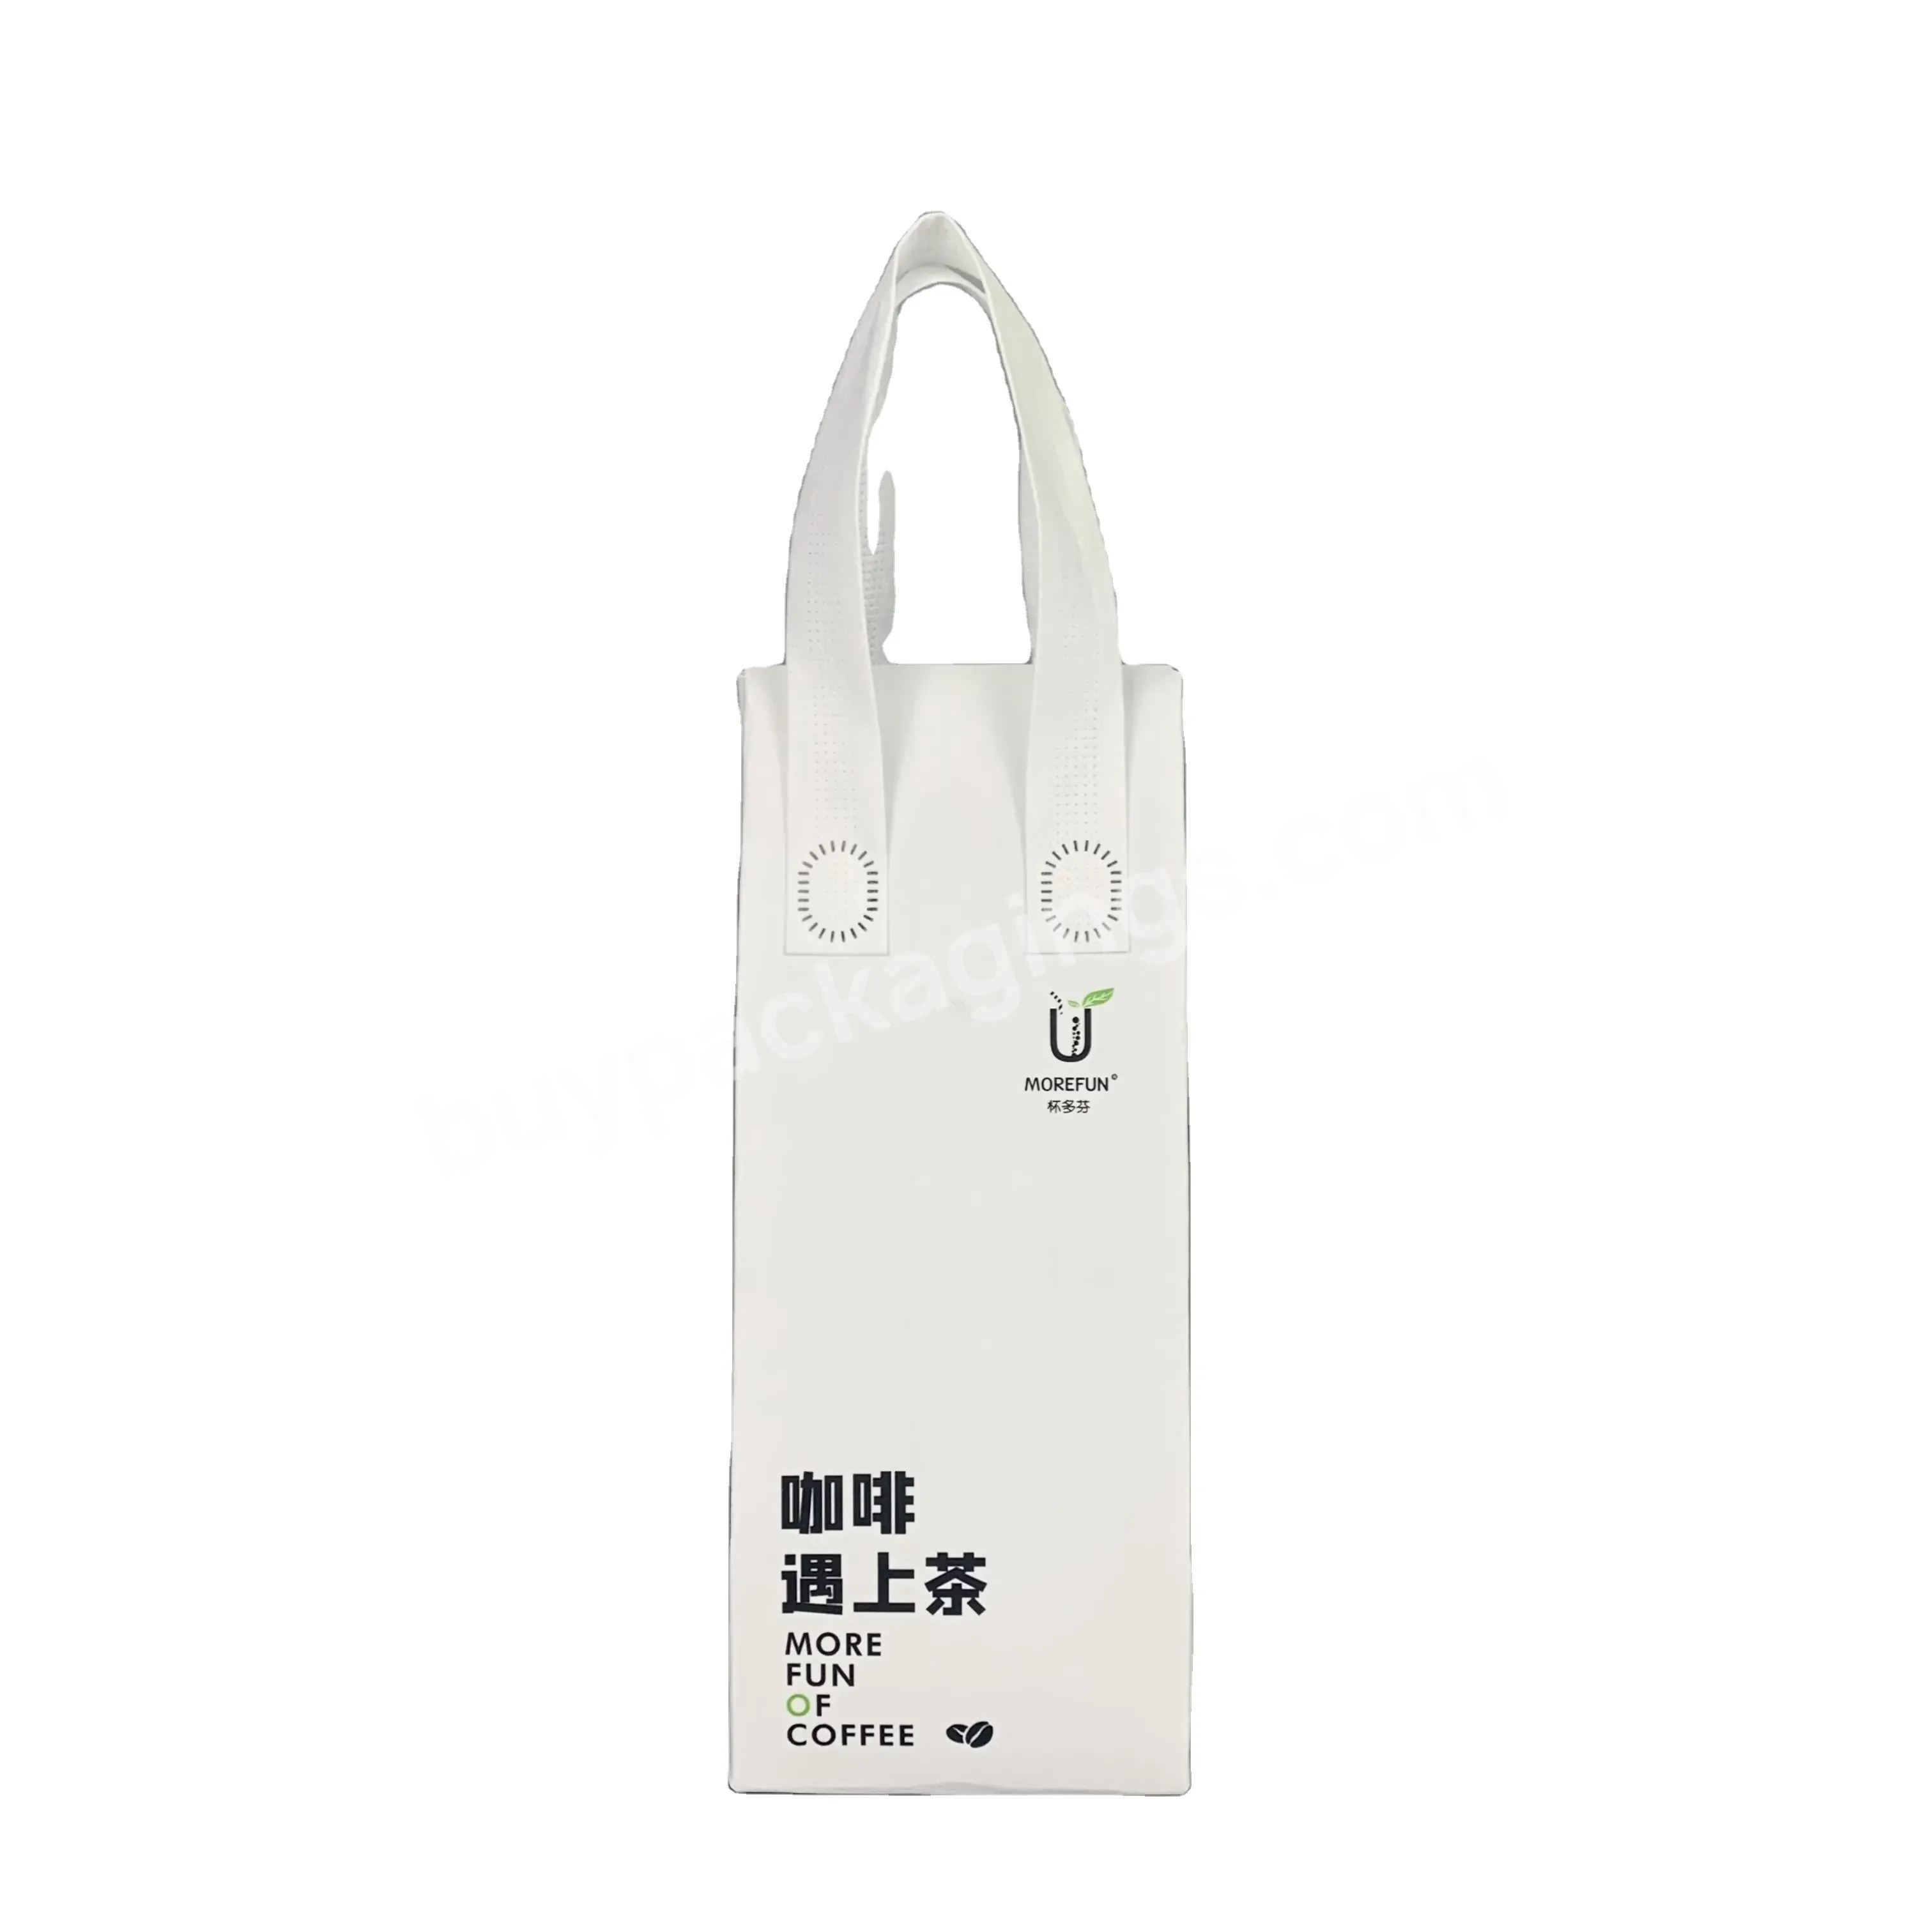 New Design Recyclable Pet Non Woven Bag Pp Non Woven Bag With Print For Food Delivery - Buy Rpet Shopping Bag,Pet Non Woven Bag,Pp Non Woven Bag.